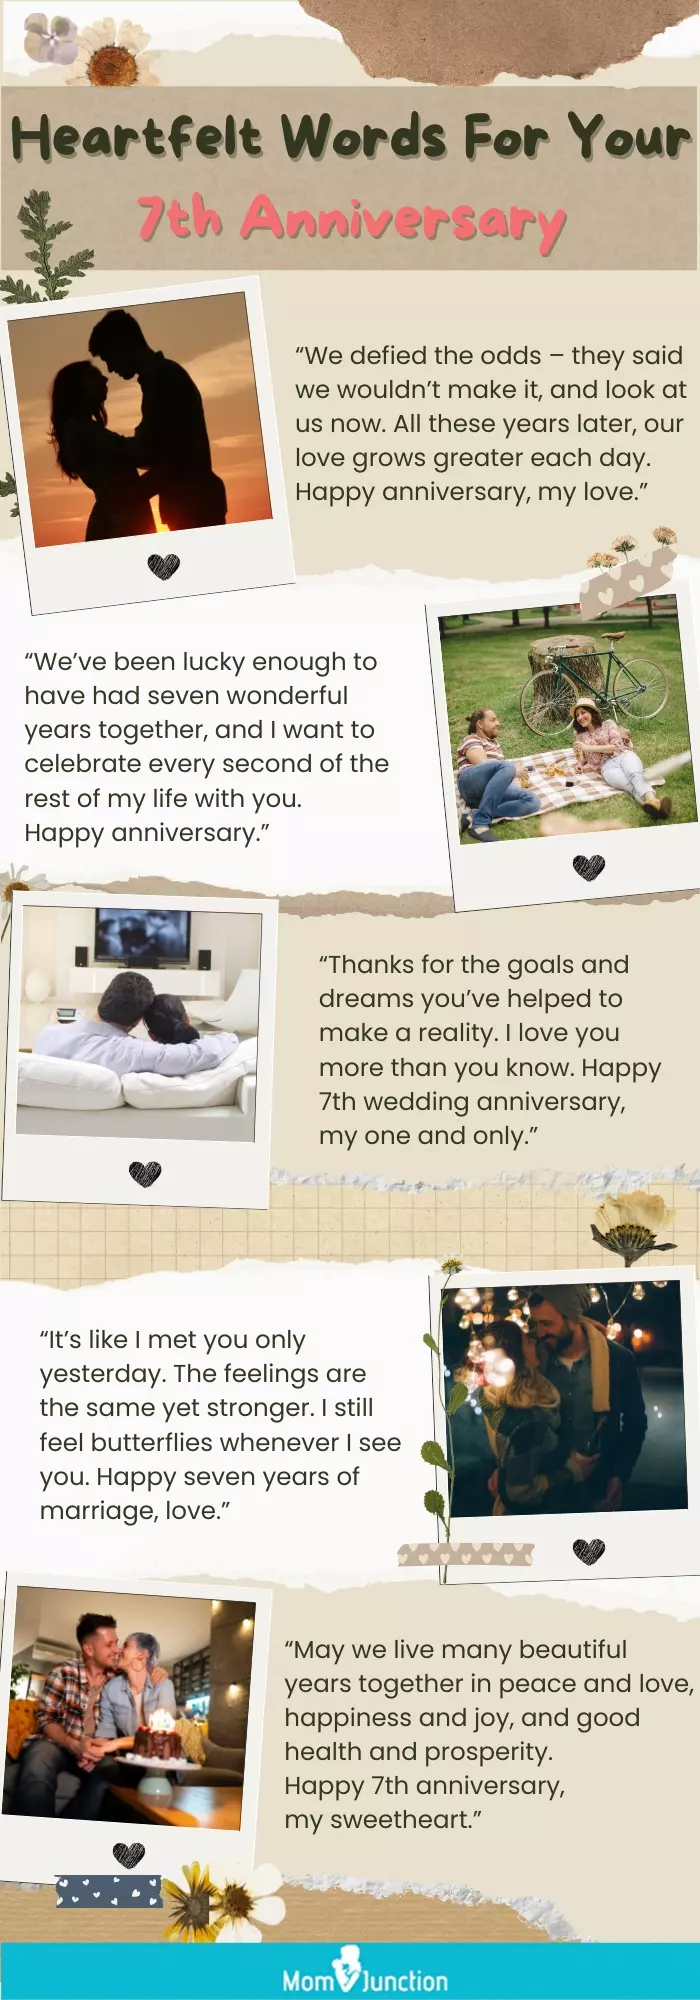 heartfelt words for your 7th anniversary (infographic)